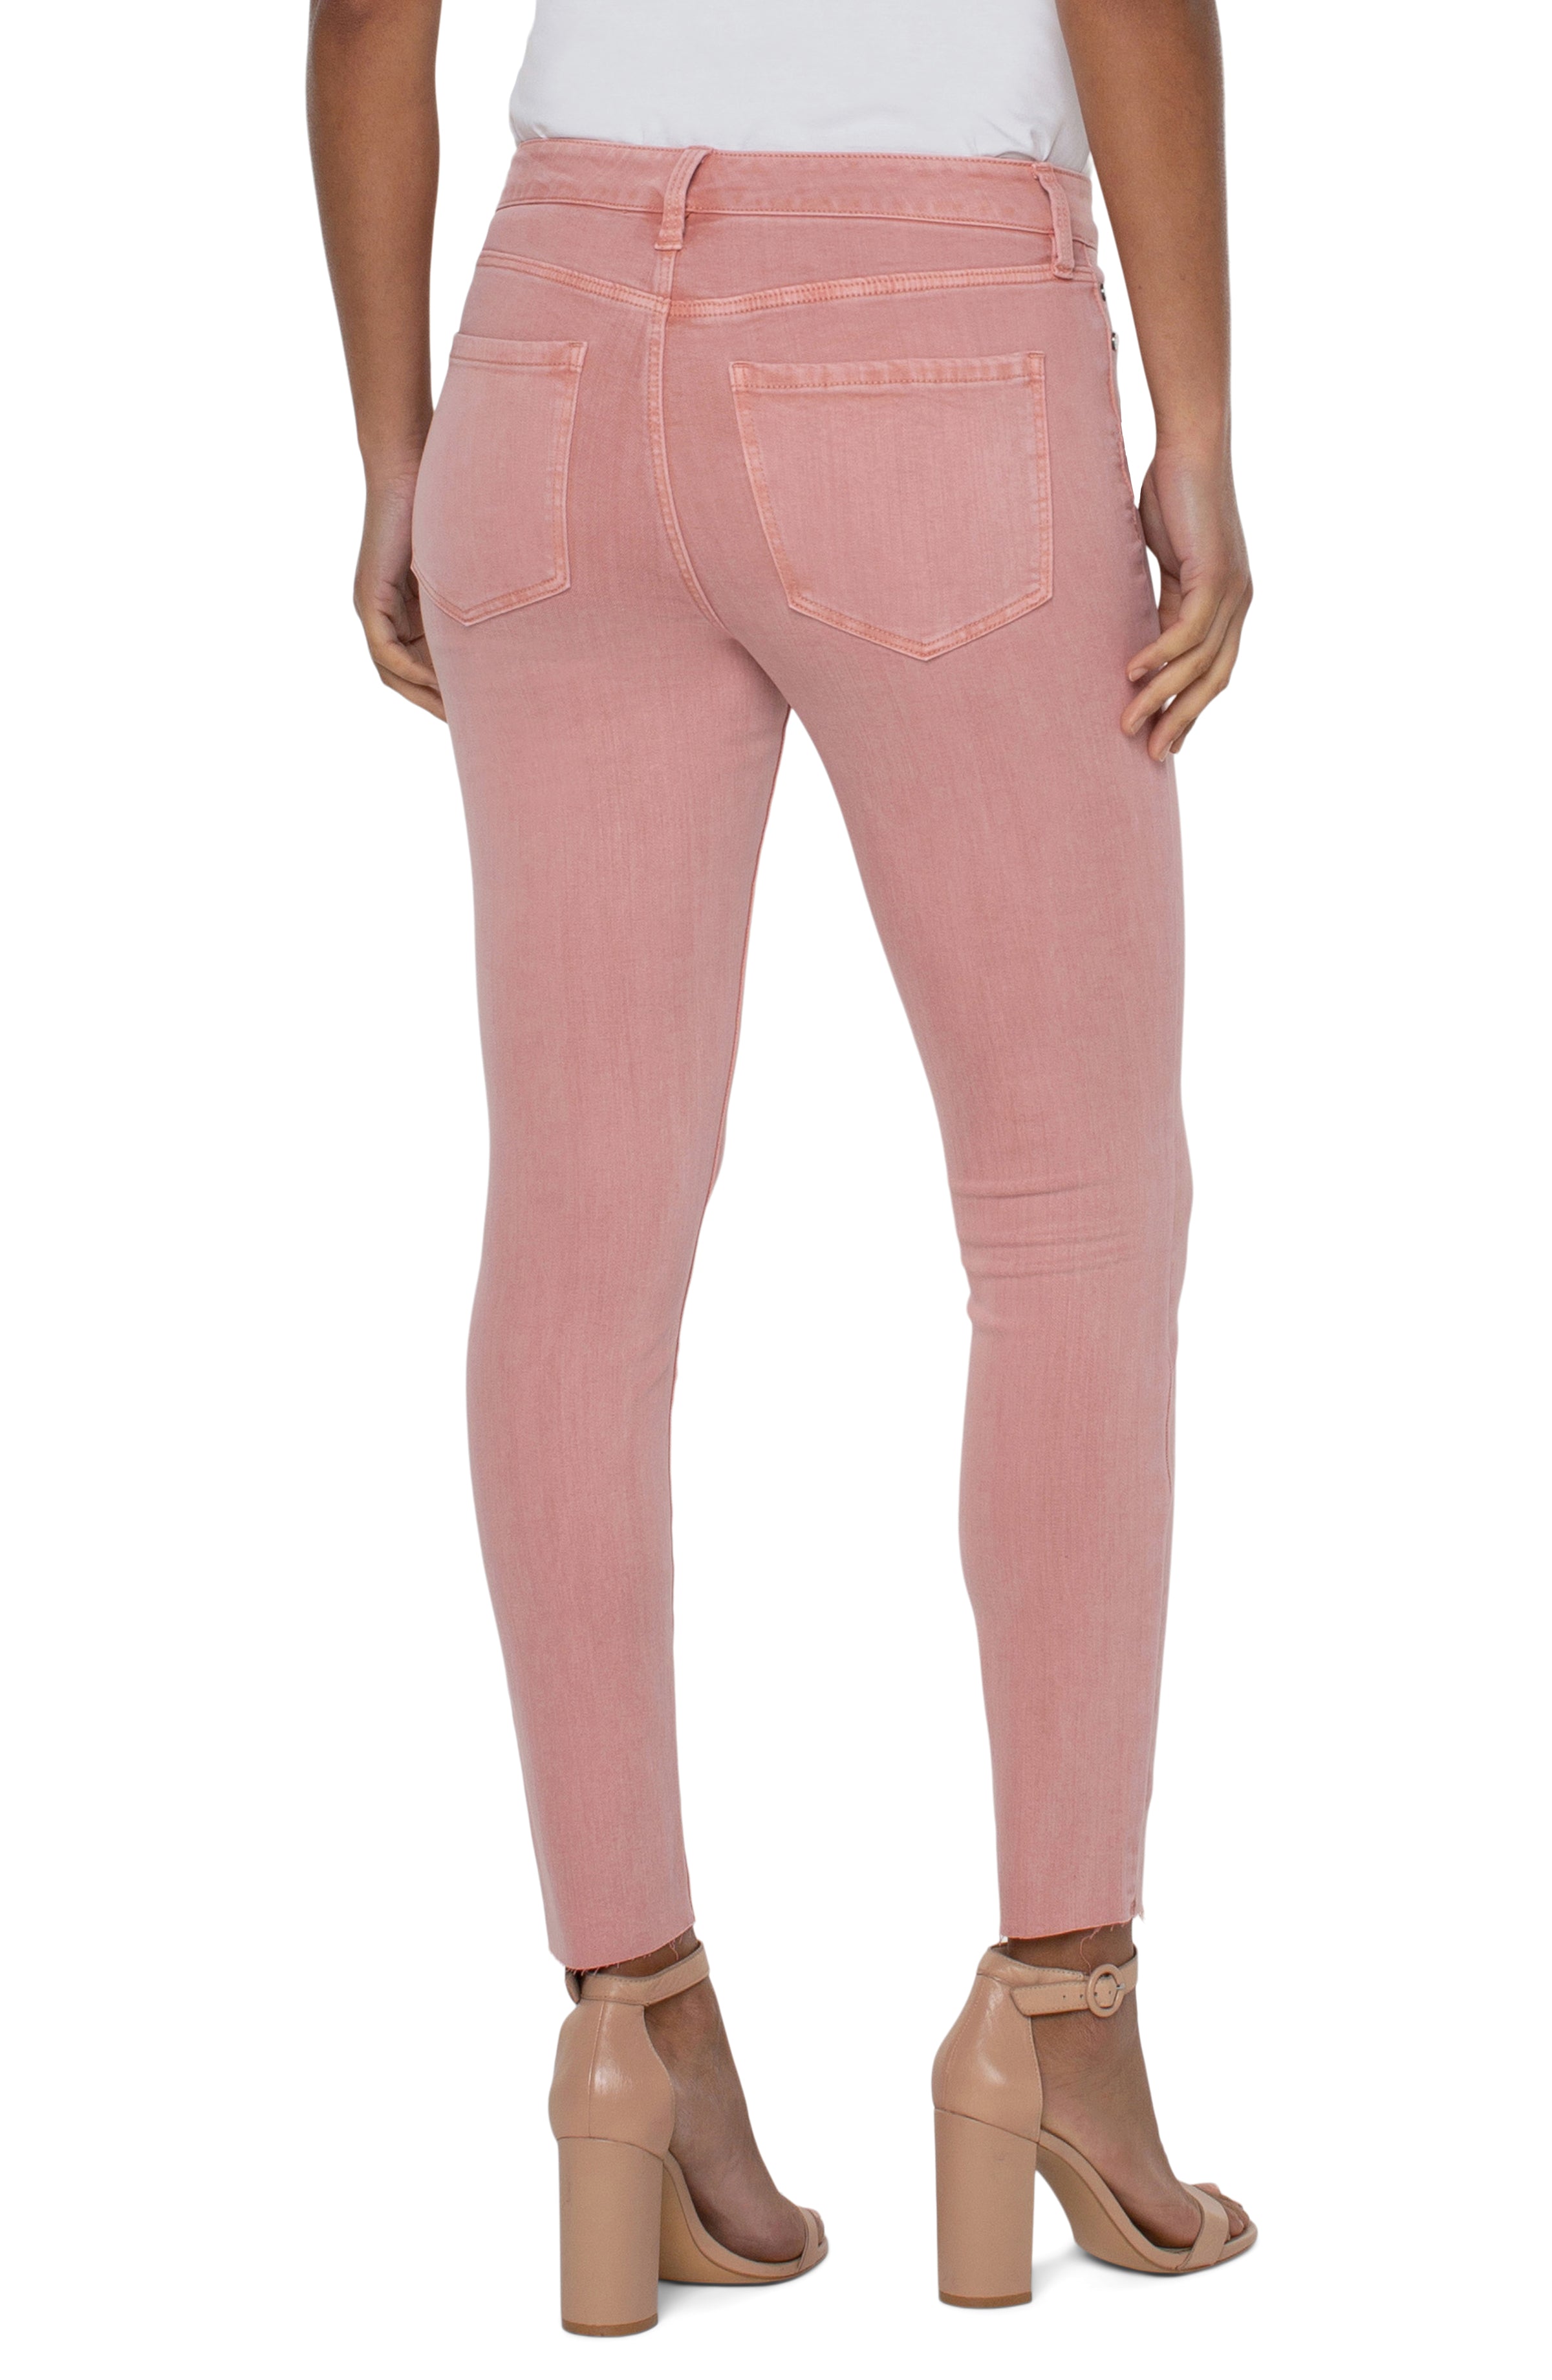 Liverpool Abby Jean 28 in - Rose Blush